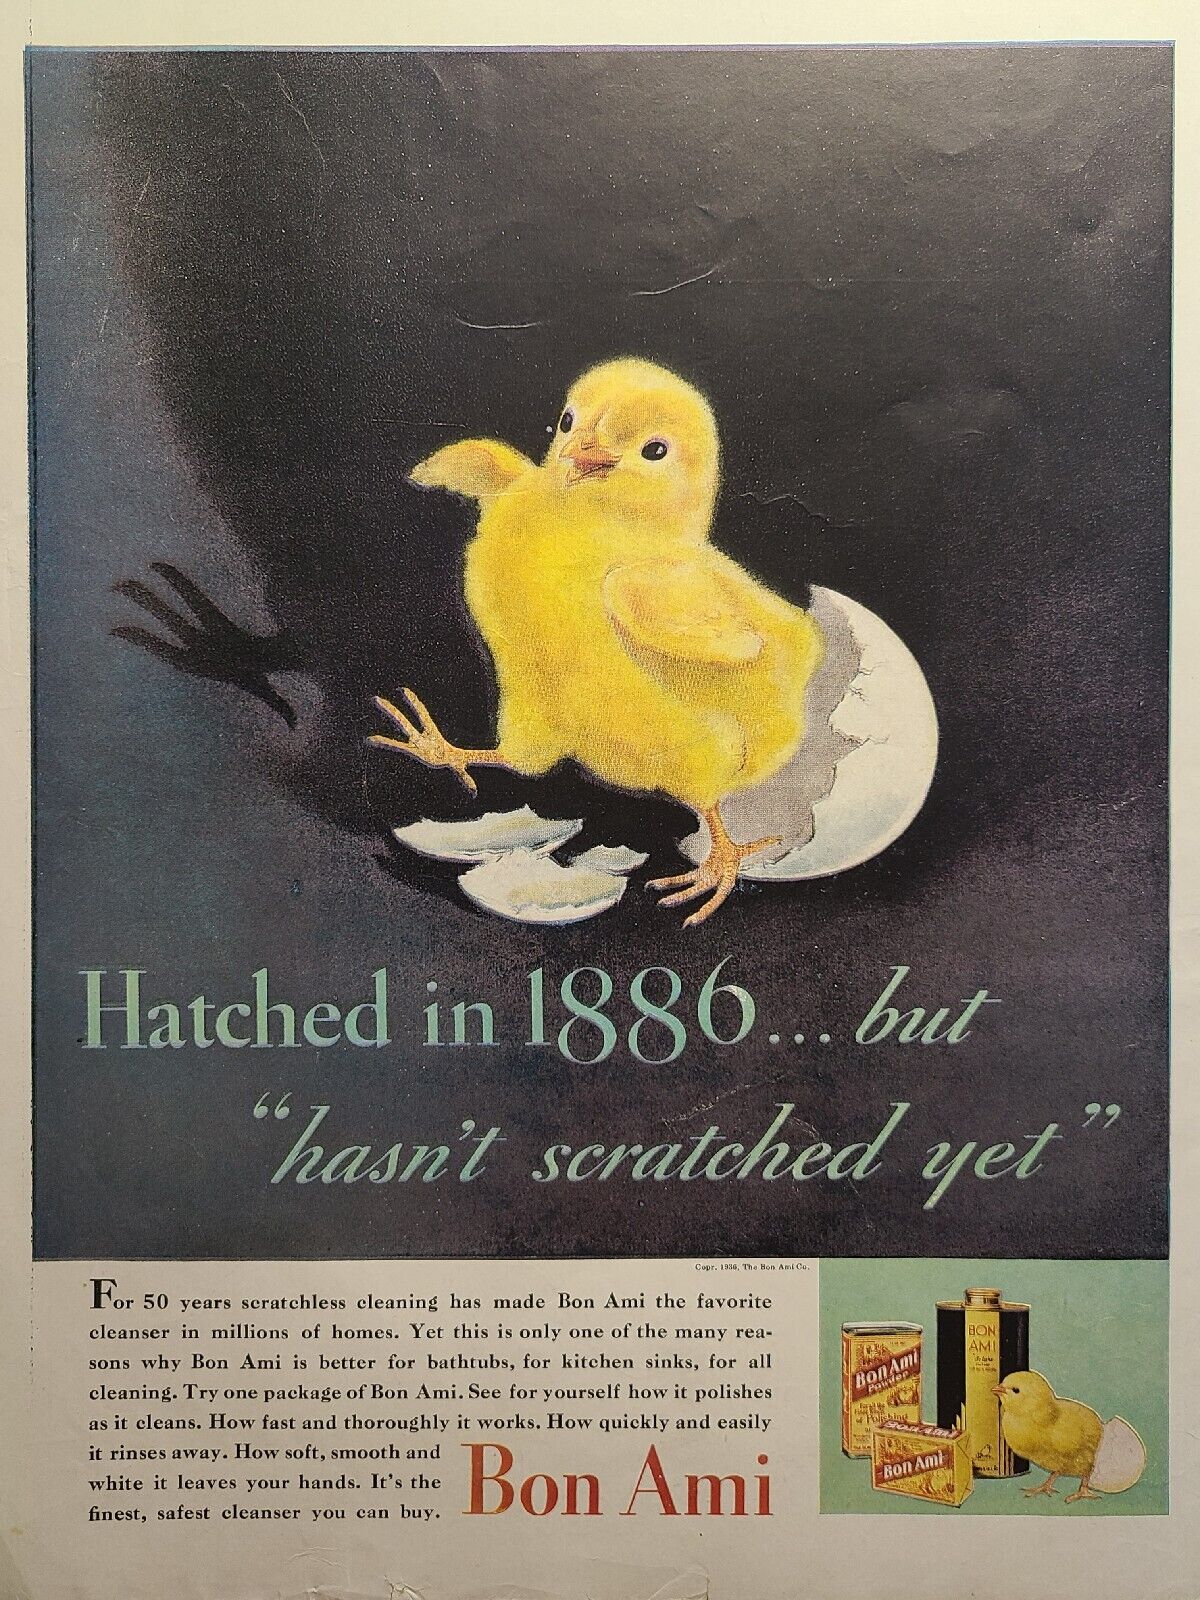 Bon Ami Non-Scratch Cleanser Chick Hasn't Scratched Yet Vintage Print Ad 1936